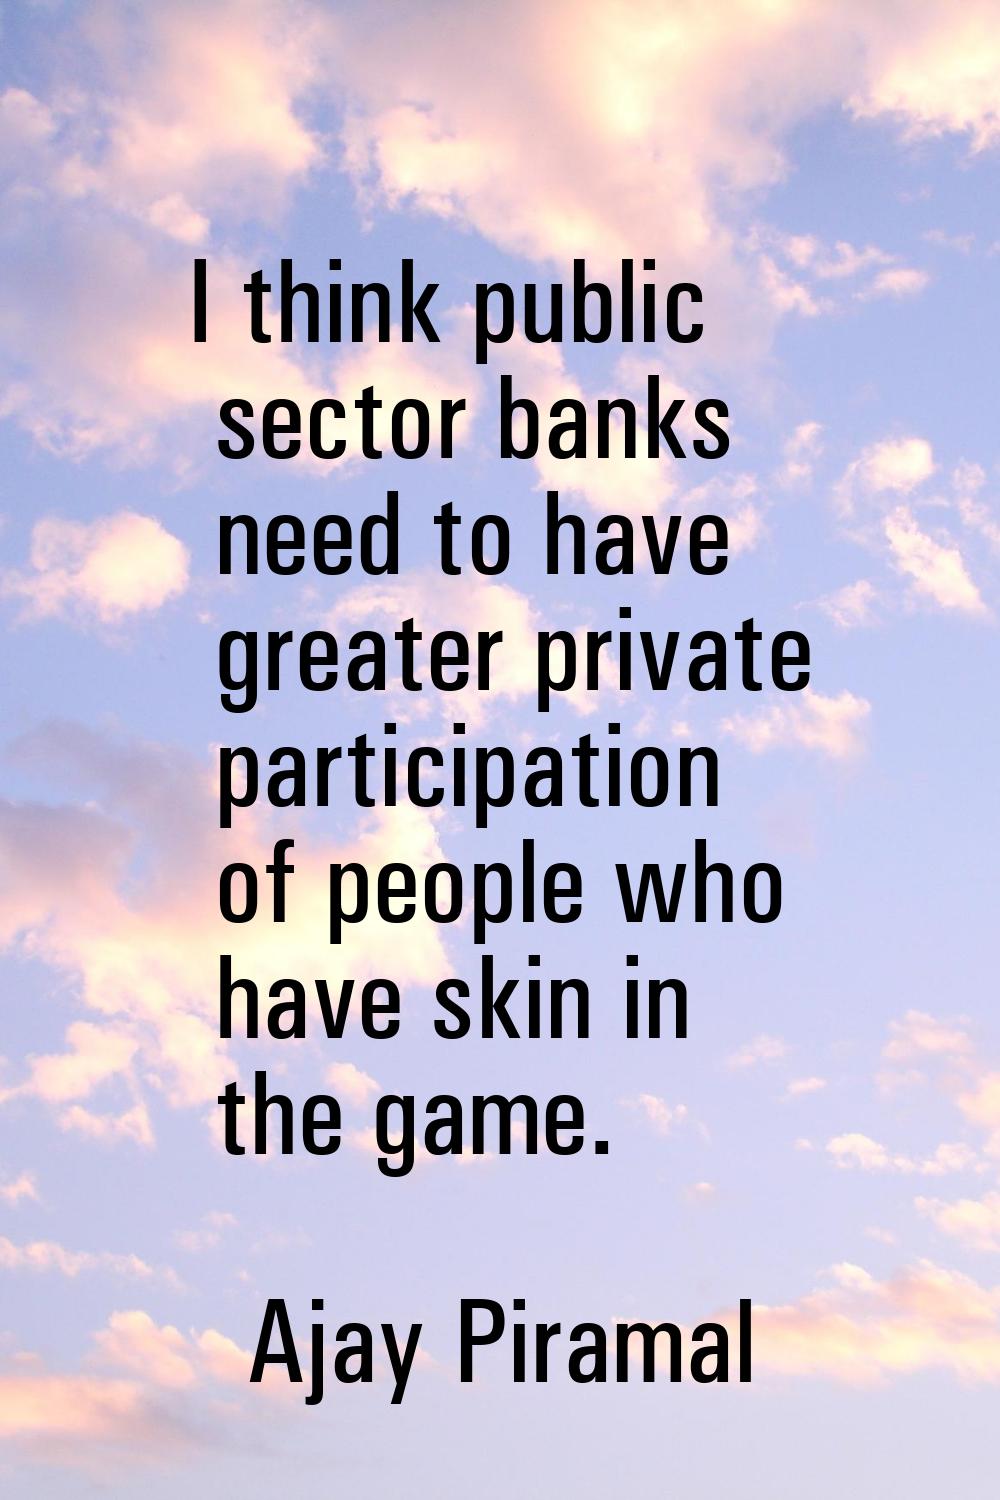 I think public sector banks need to have greater private participation of people who have skin in t